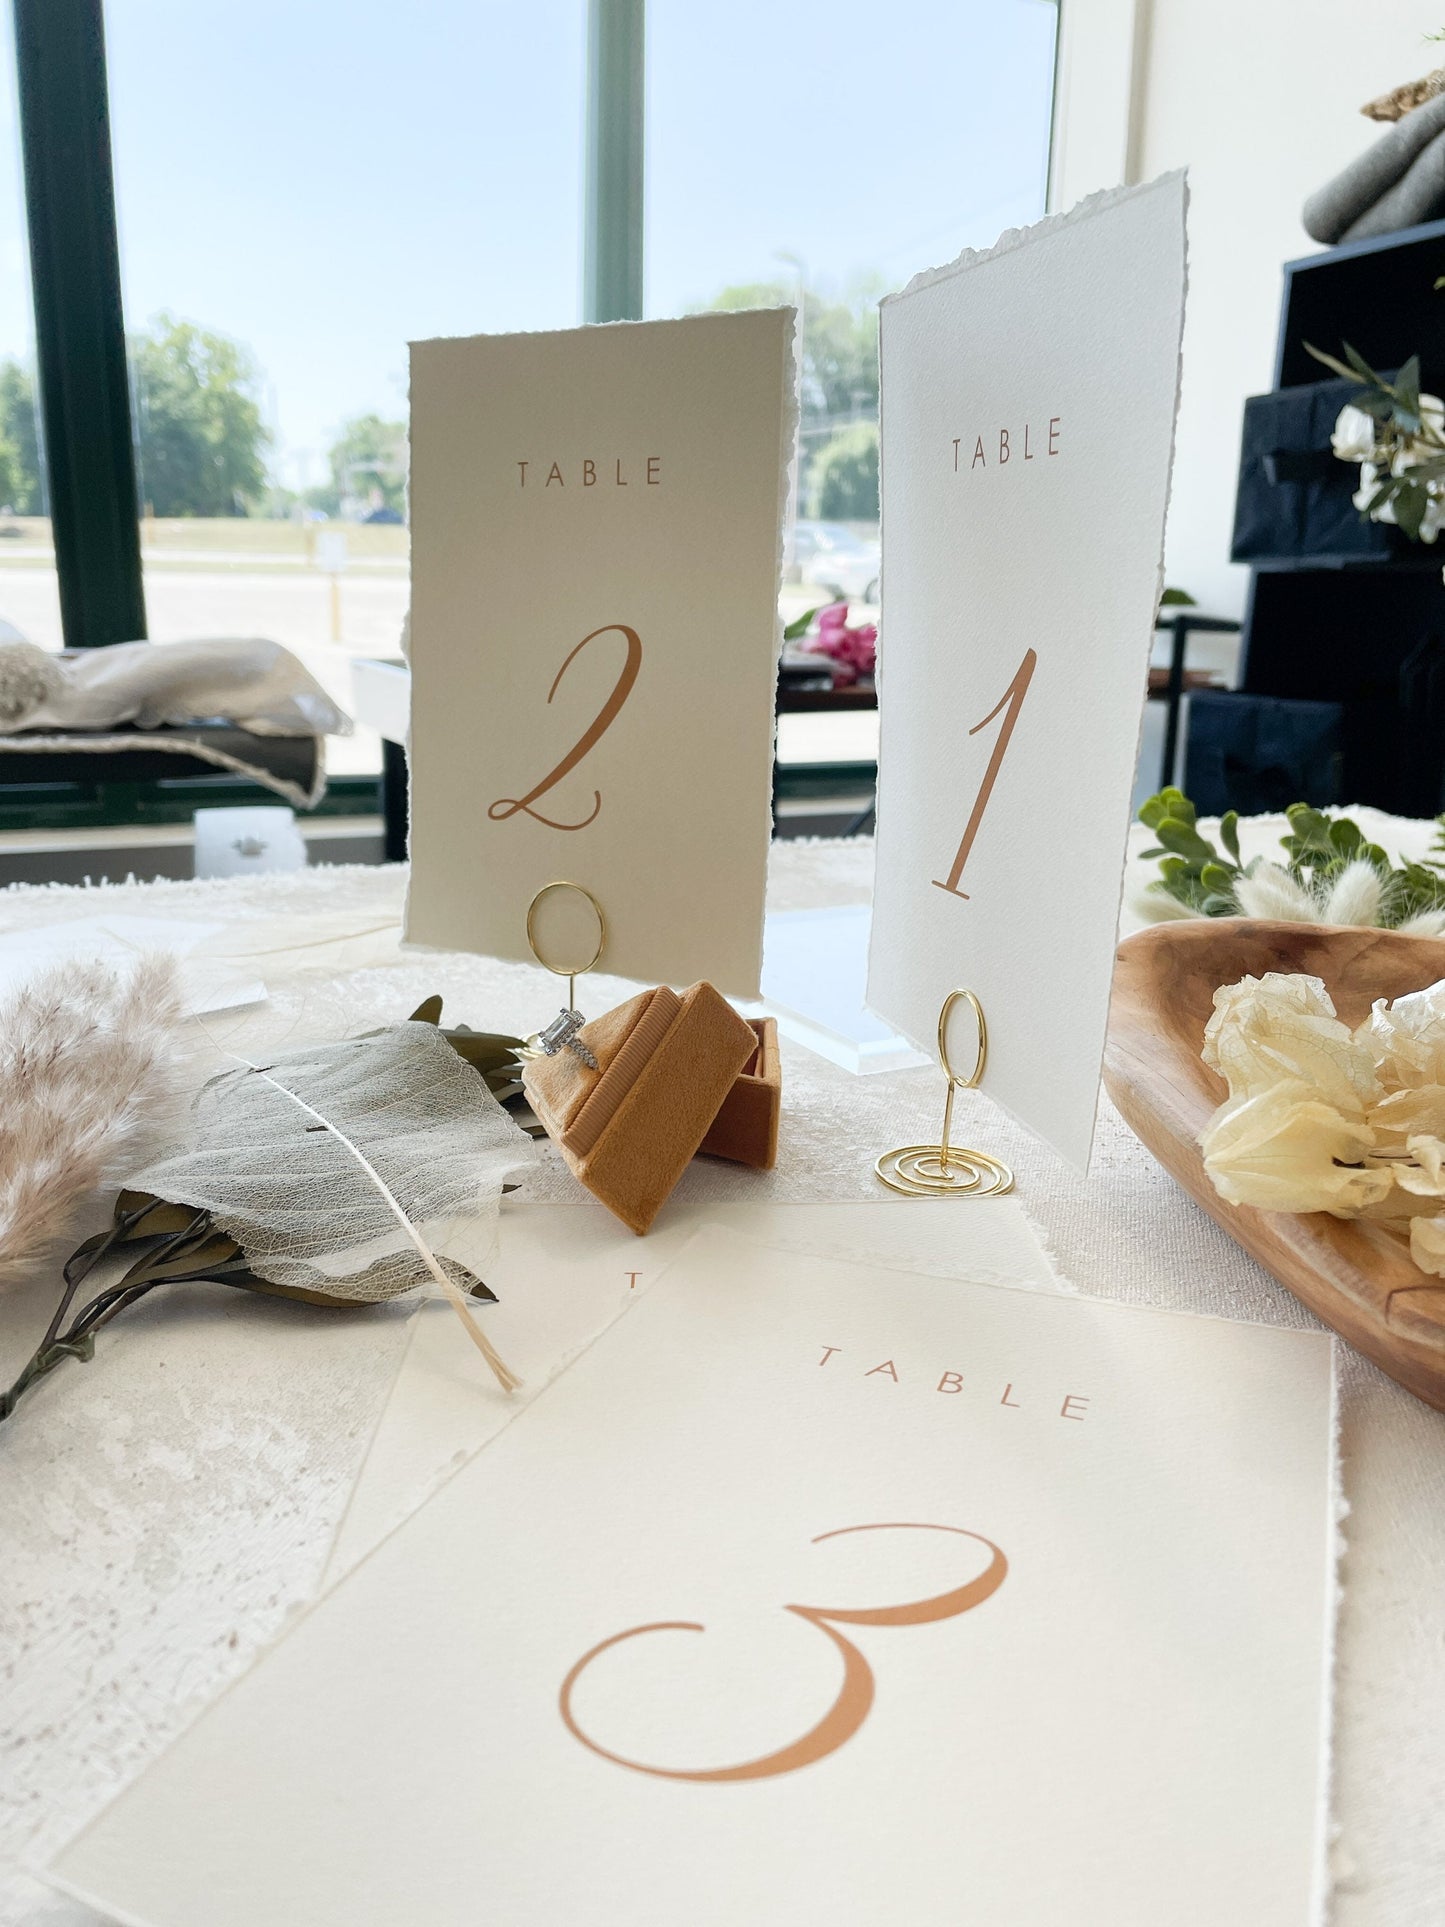 Wedding Table Numbers Numerical | PRINTED -  Deckle Edge Style 211